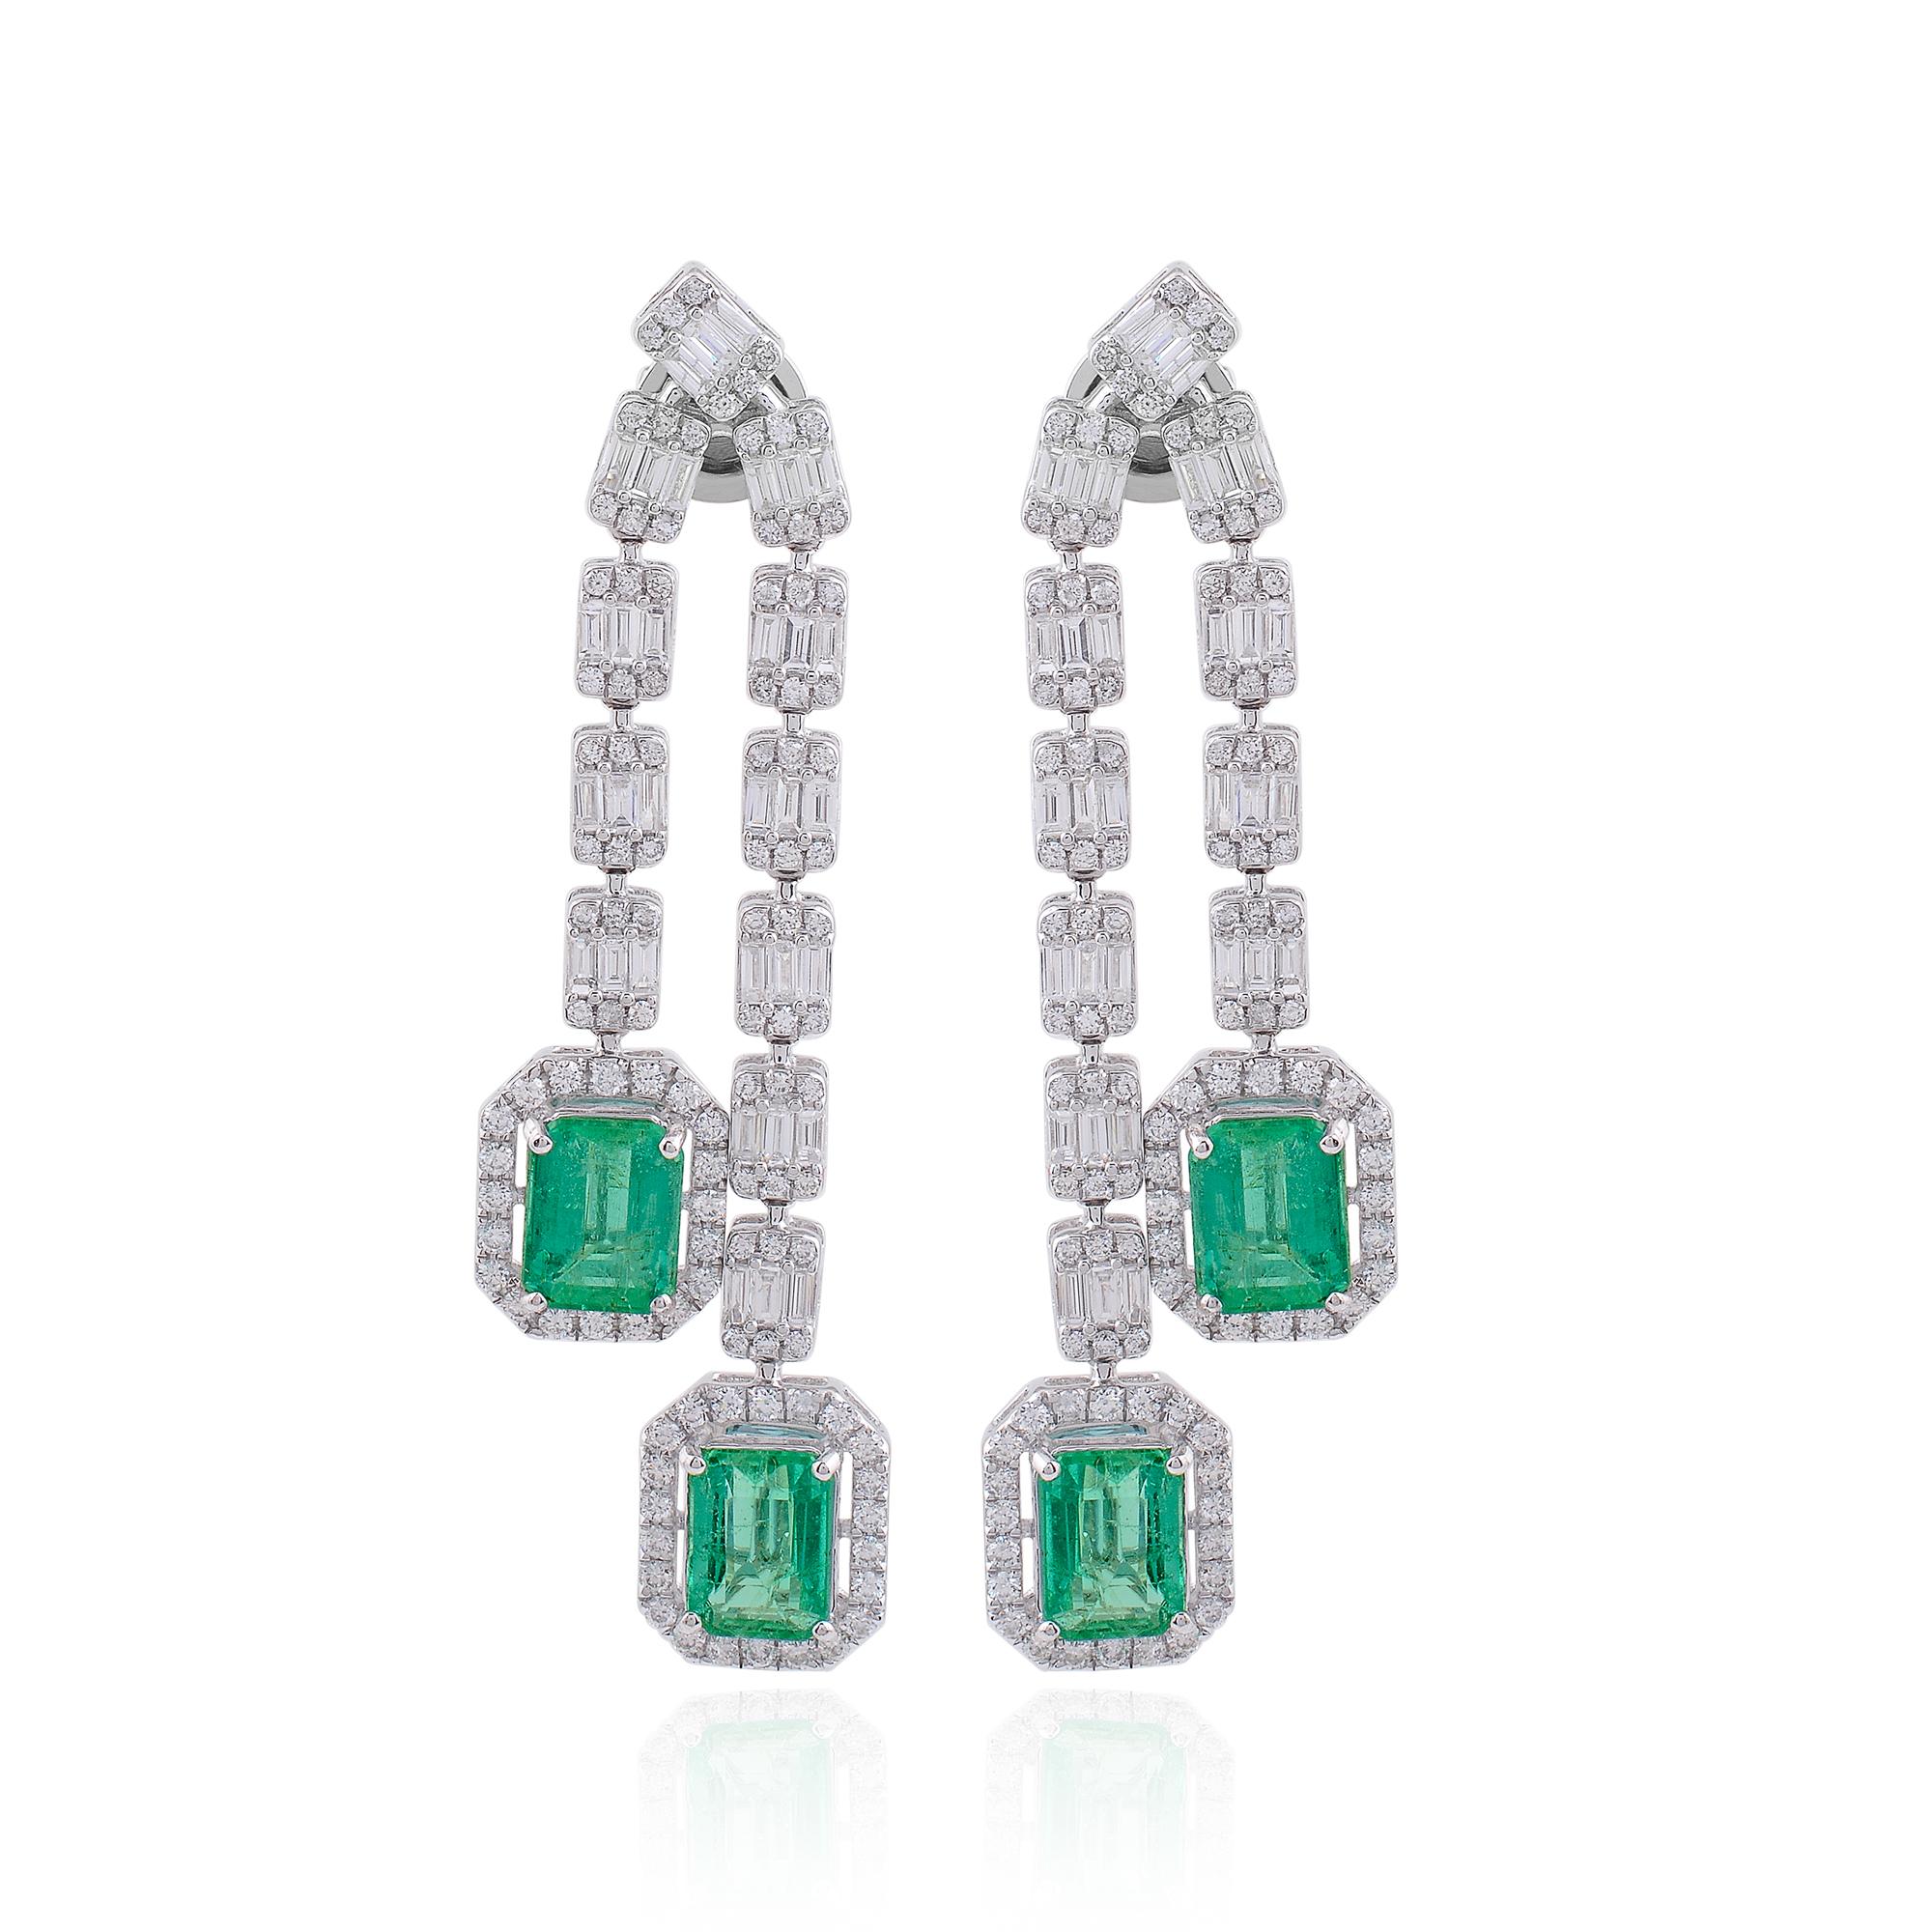 Item Code :- SEE-1347
Gross Wt. :- 16.12 gm
18k White Gold Wt. :- 14.44 gm
Diamond Wt. :- 3.40 Ct. ( AVERAGE DIAMOND CLARITY SI1-SI2 & COLOR H-I )
Emerald Wt. :- 5 Ct.
Earrings Size :- 53 mm approx.

✦ Sizing
.....................
We can adjust most